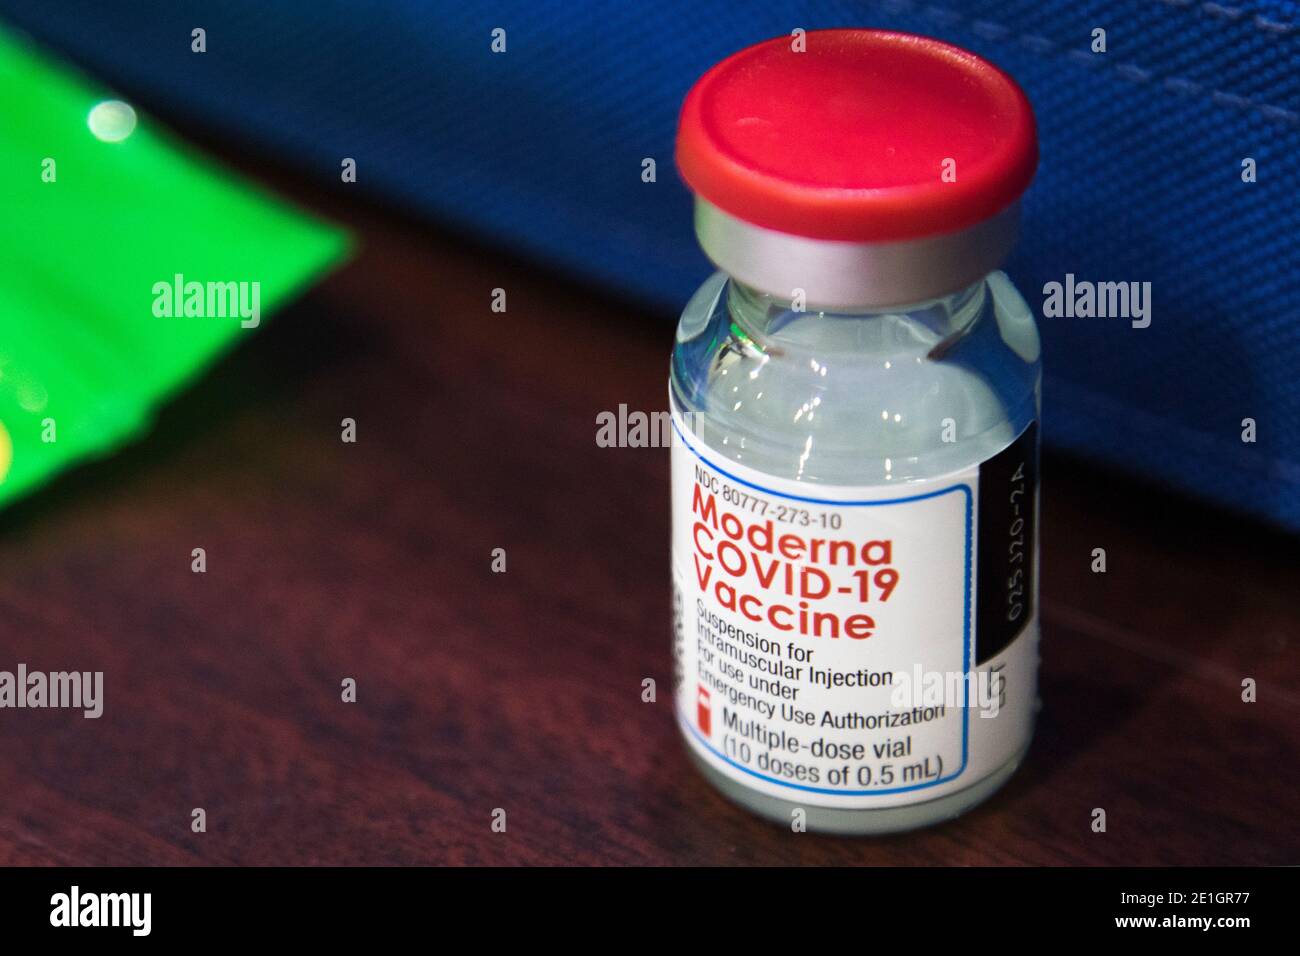 Moderna COVID-19 vaccine, used for the first initial rounds of vaccinations on December 23, 2020 at Fort Riley, Kansas. Healthcare professionals on Fort Riley were the first to receive the vaccinations. (USA) Stock Photo